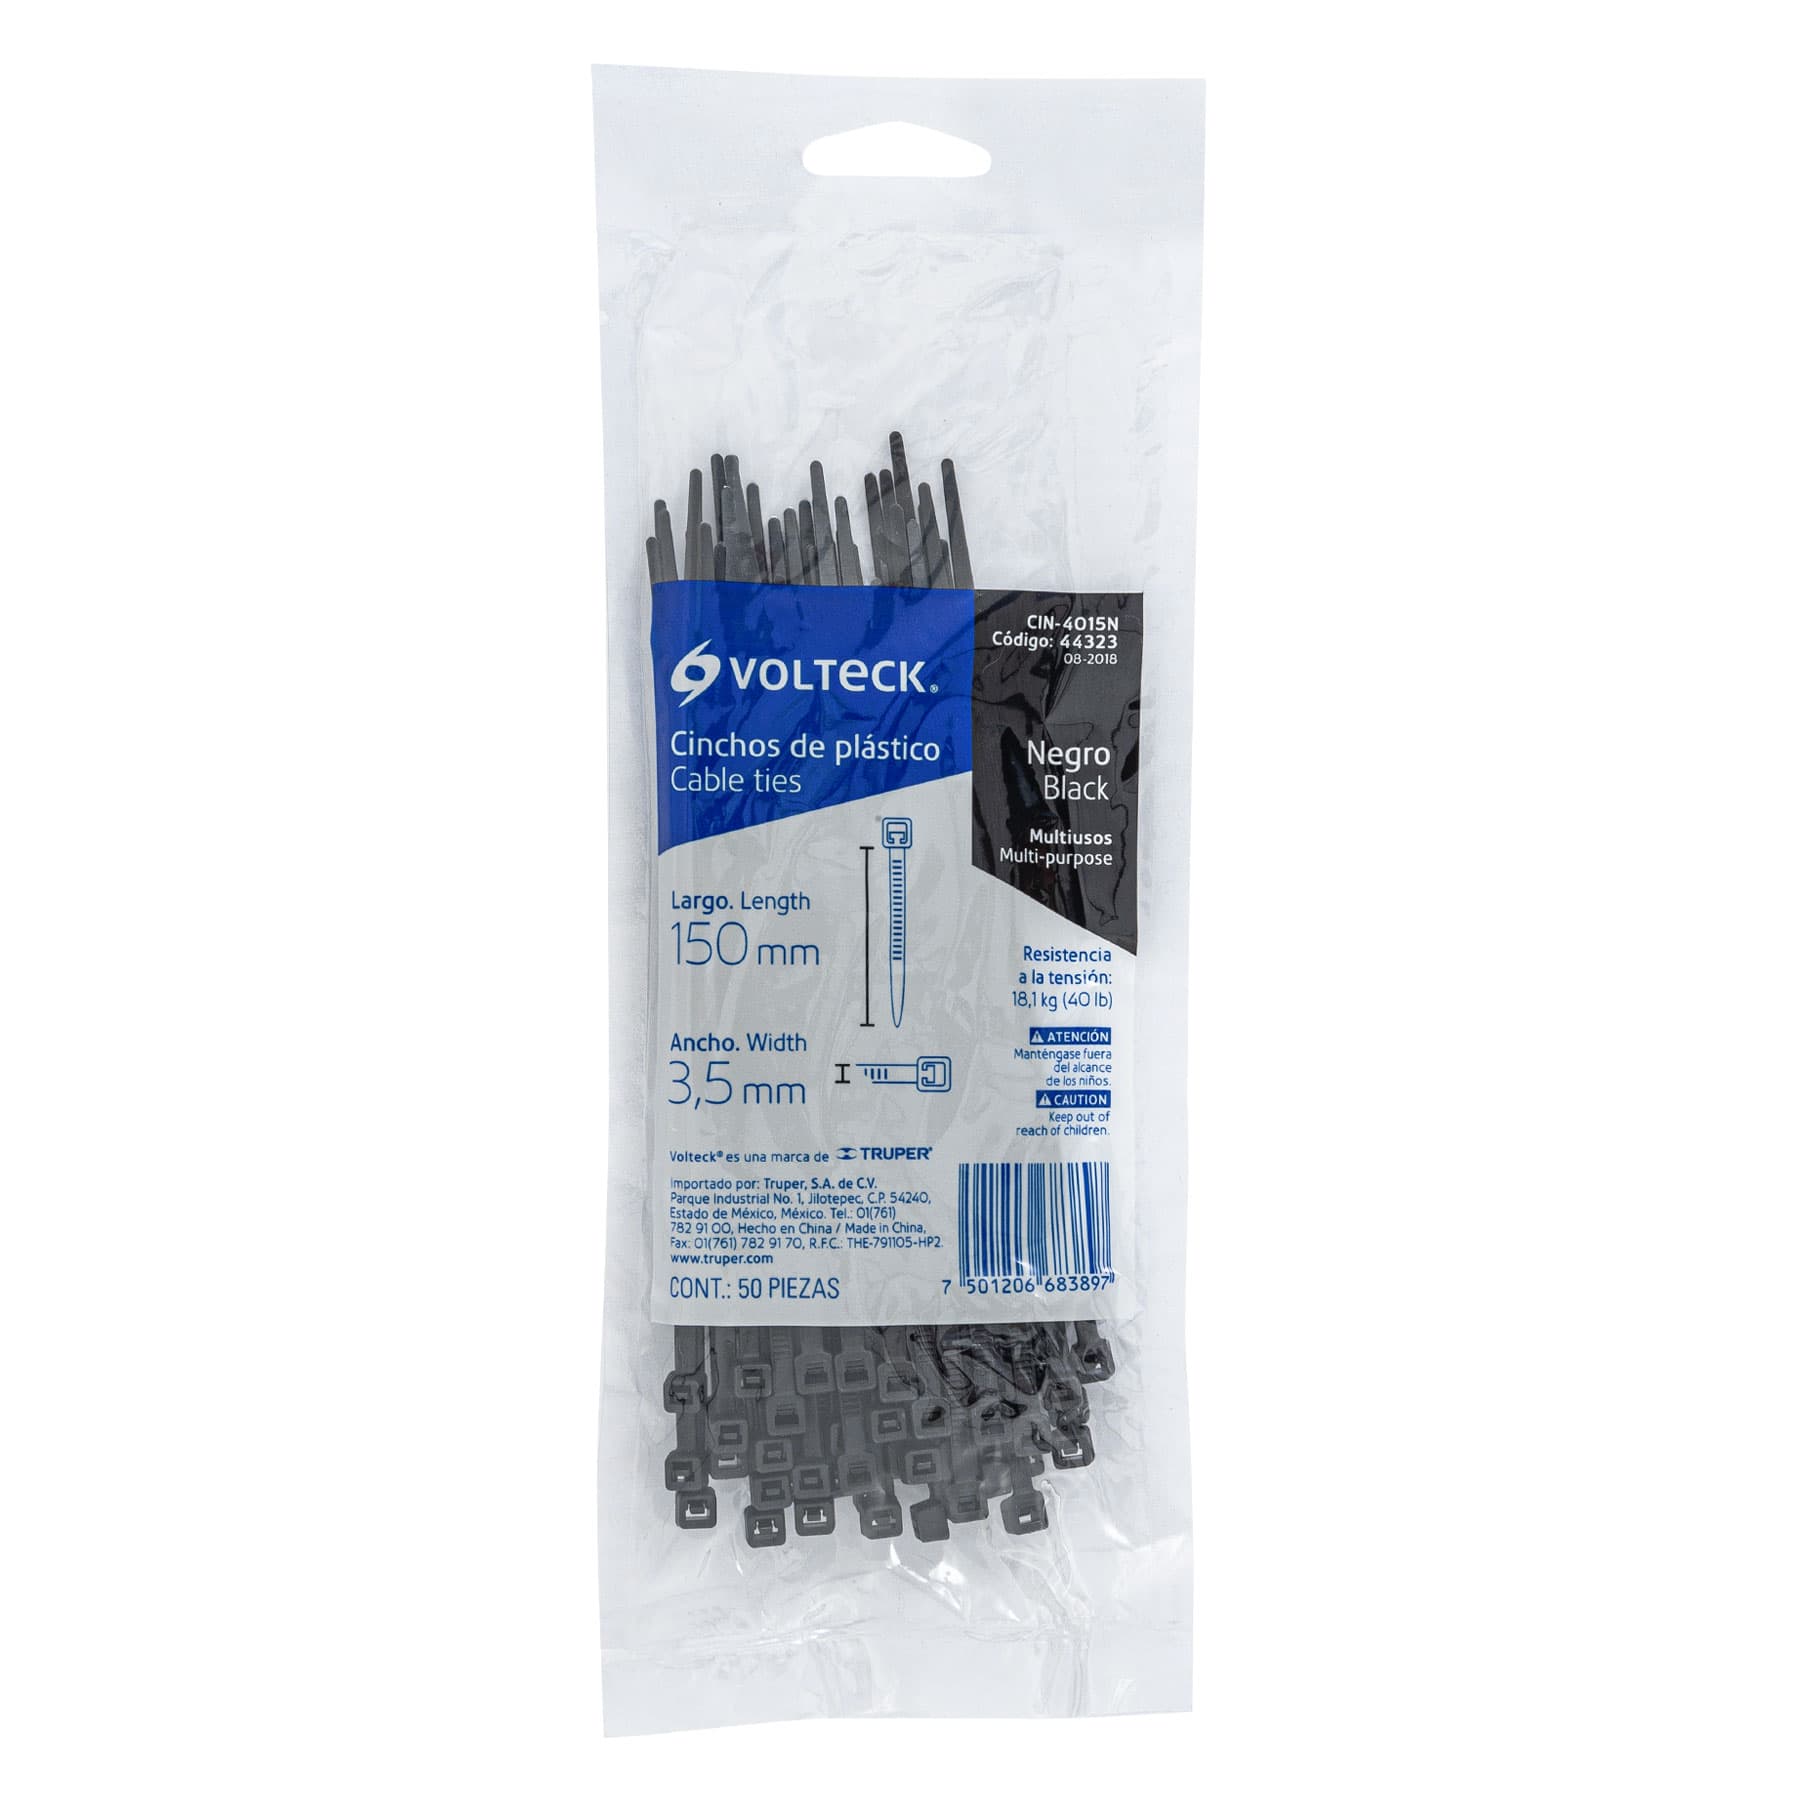 Volteck Plastic Cable Ties 40 lb Tensile Strenght